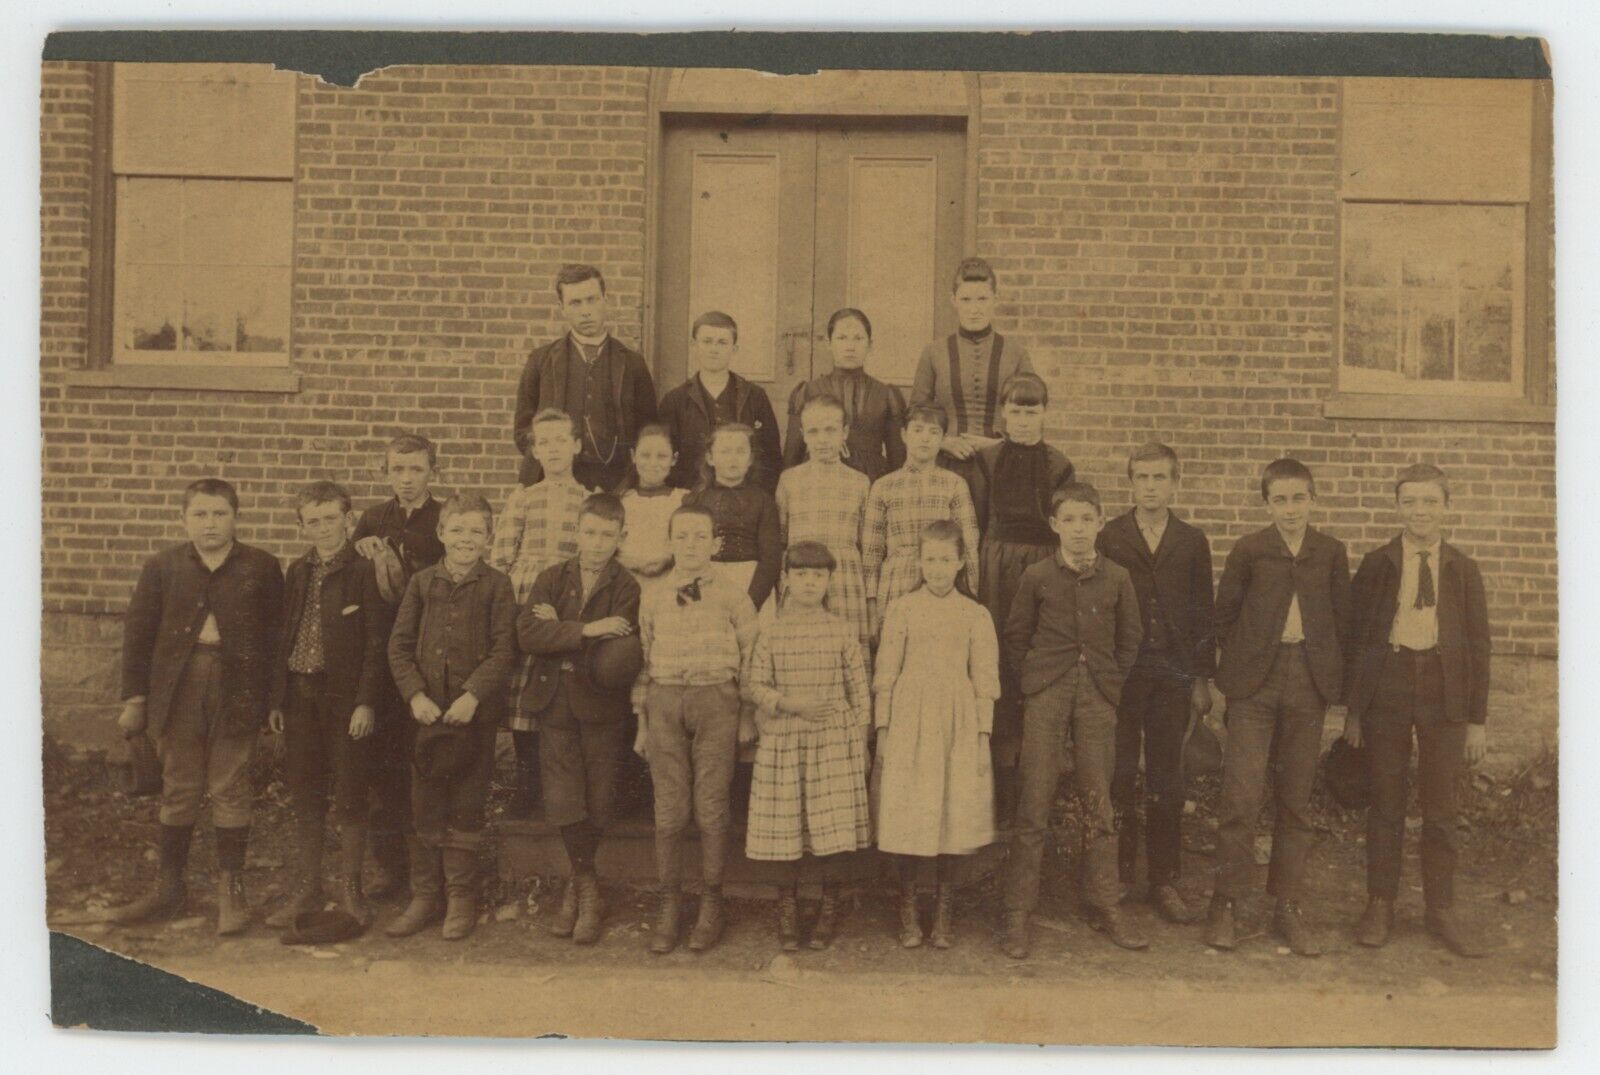 Antique c1900s Mounted Photo Group of School Children Outside School Building